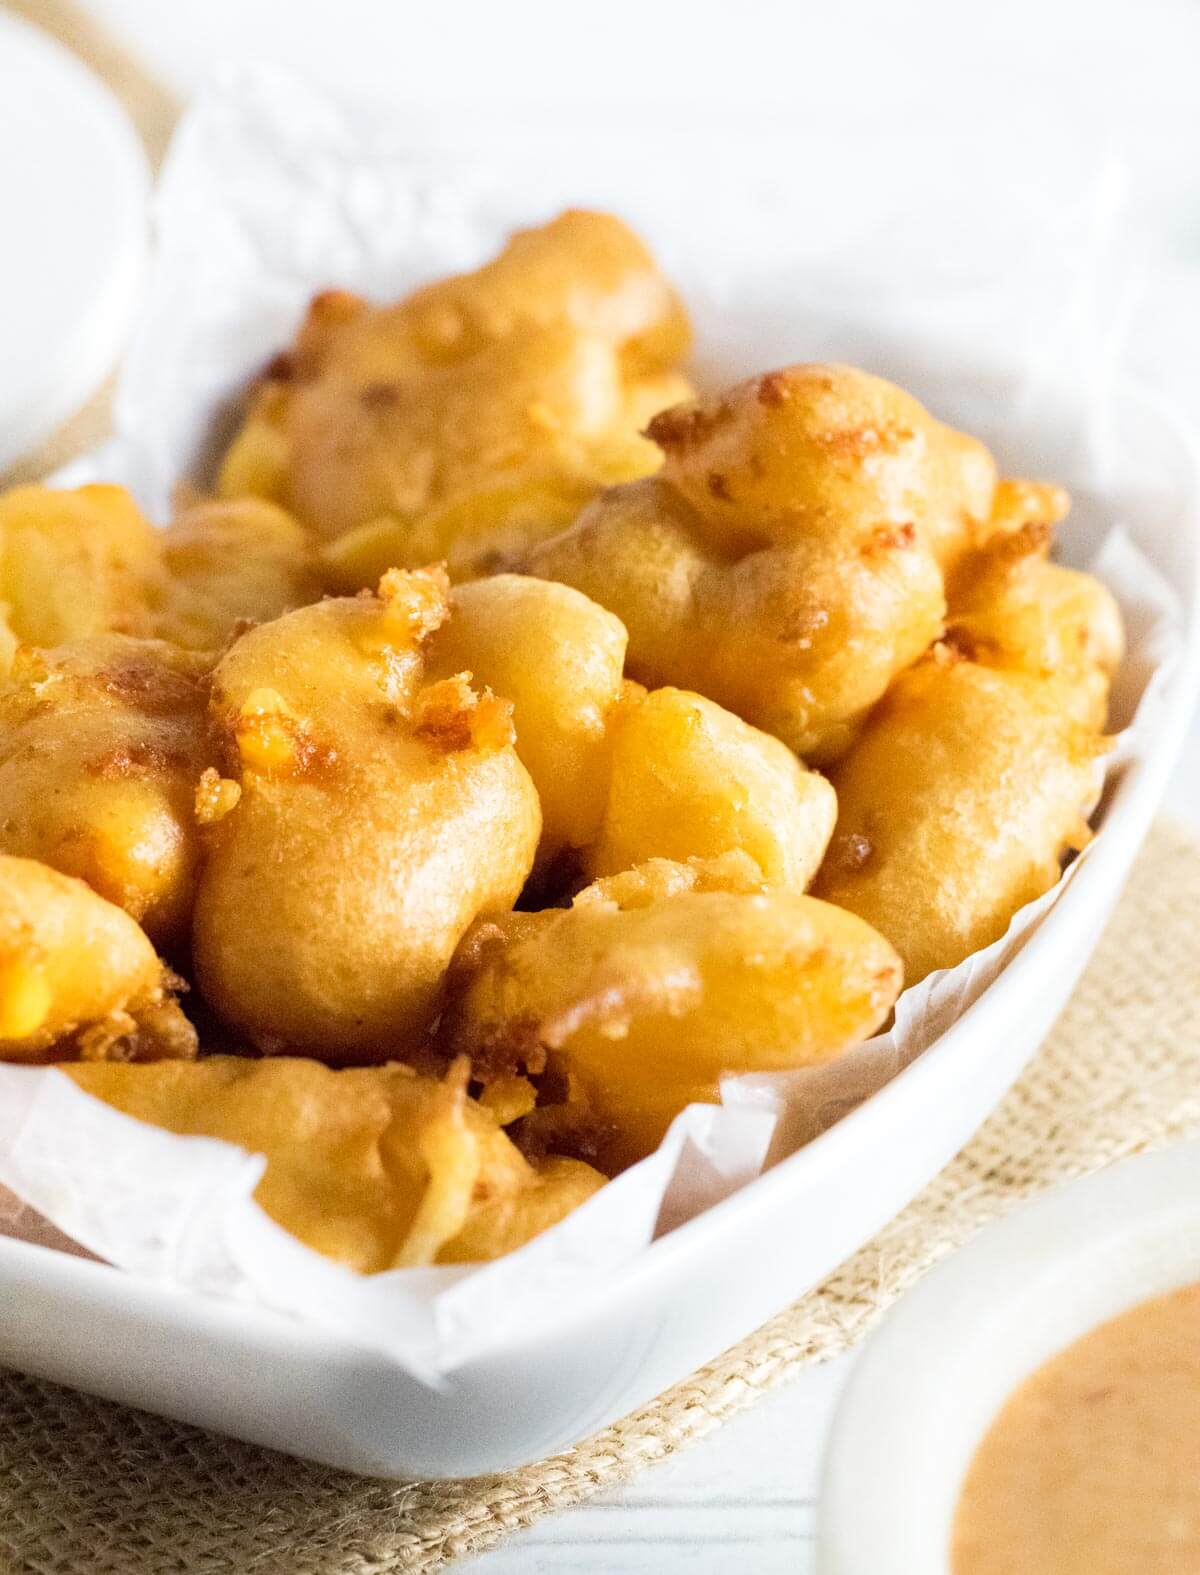 Serving homemade breaded cheese curds.